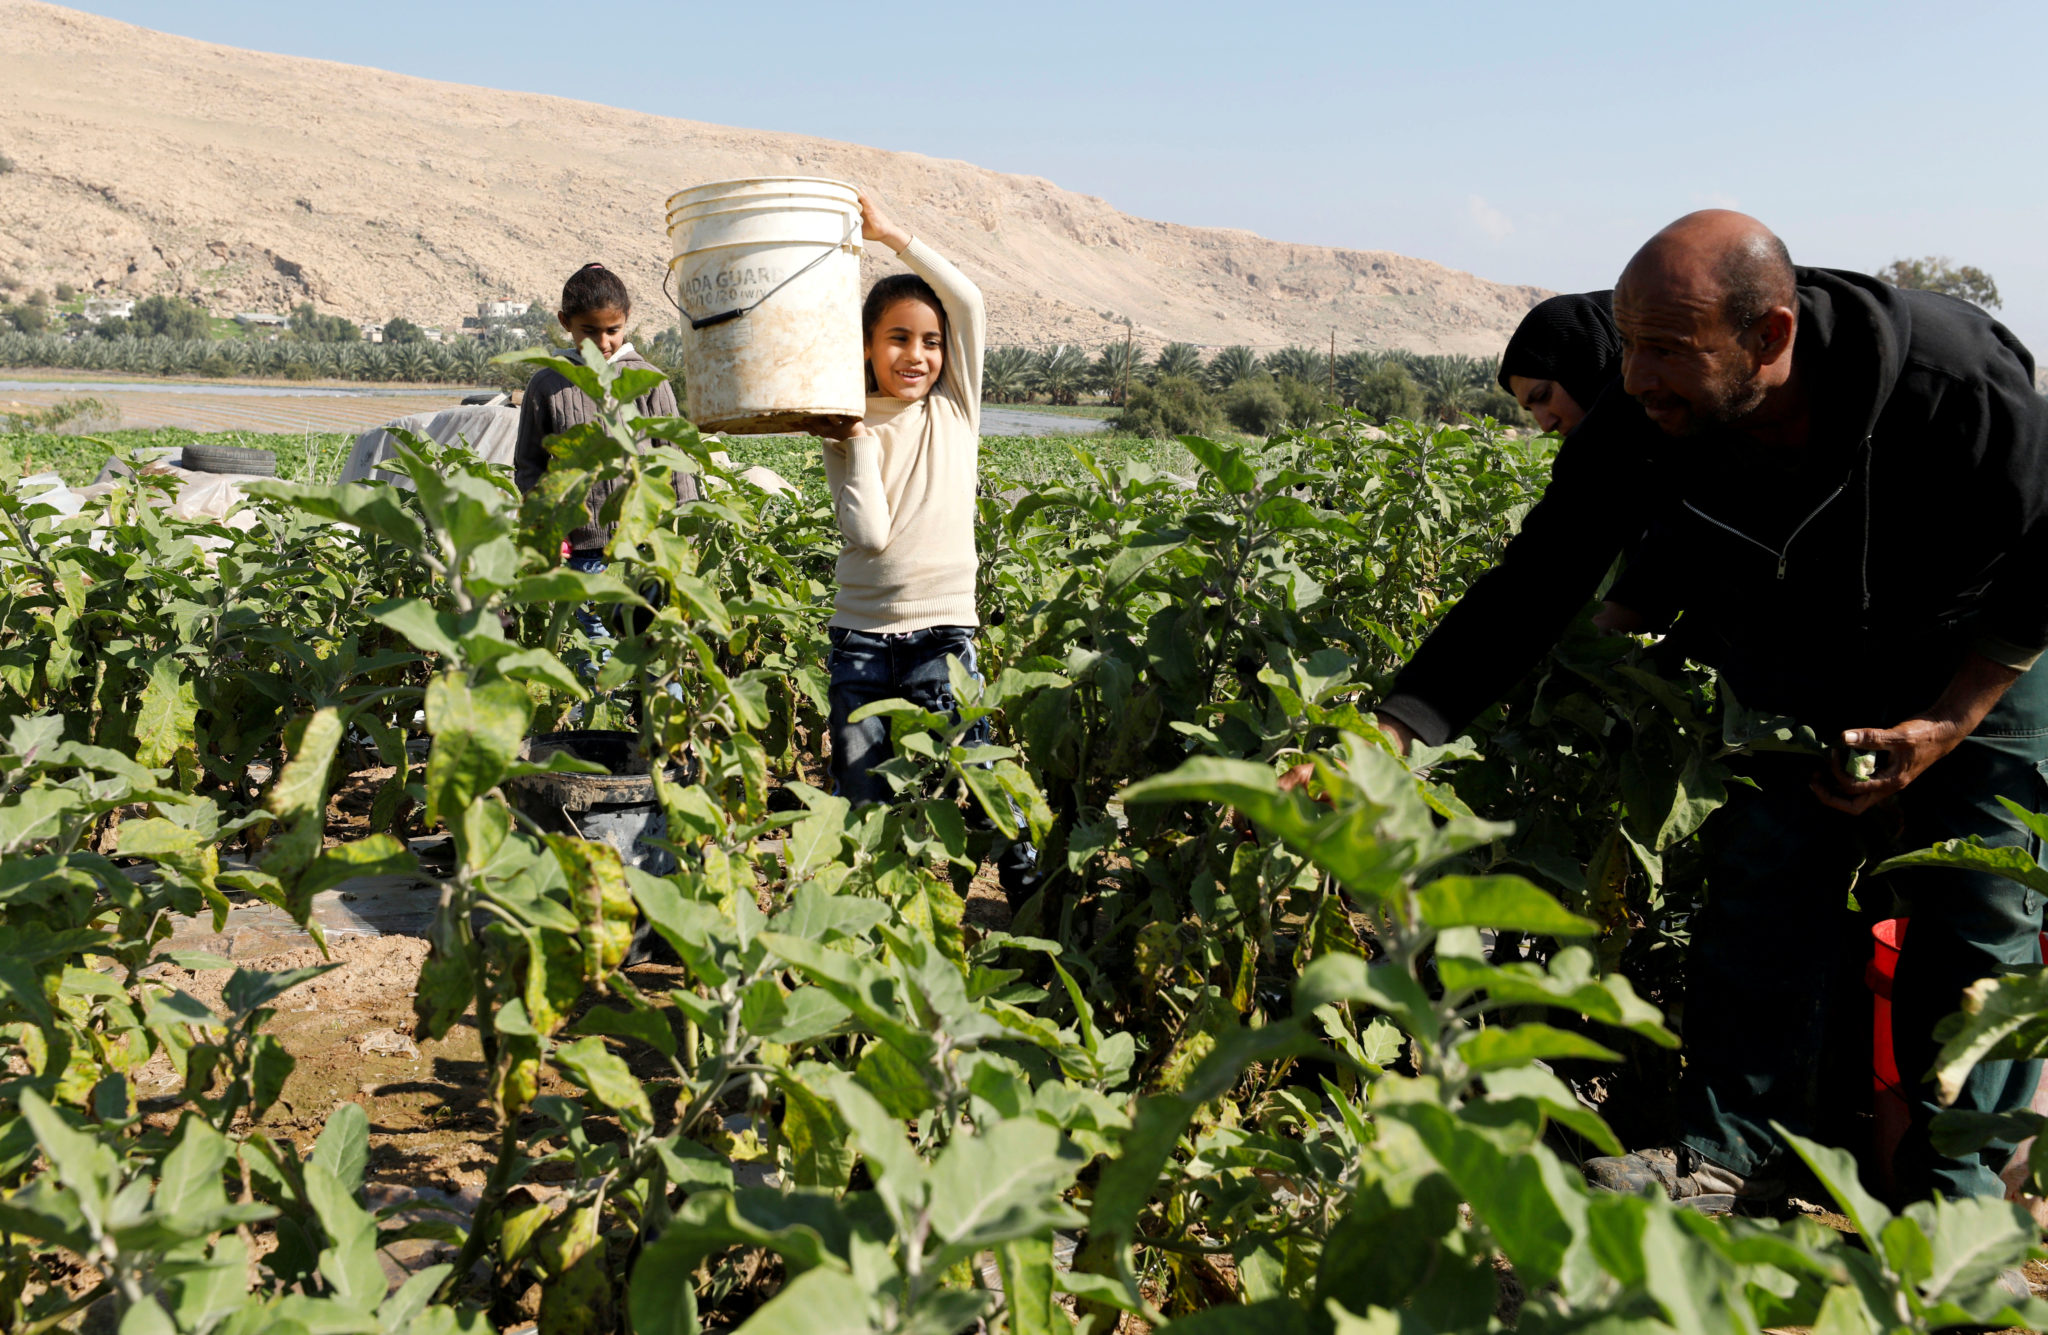 FILE PHOTO: Palestinian farmer Mohammad Masaeed picks up eggplants with his family in his farm in the village of Al-Jiftlik near Jericho in the Israeli-occupied West Bank February 5, 2020. Picture taken February 5, 2020. REUTERS/Mussa Qawasma/File Photo